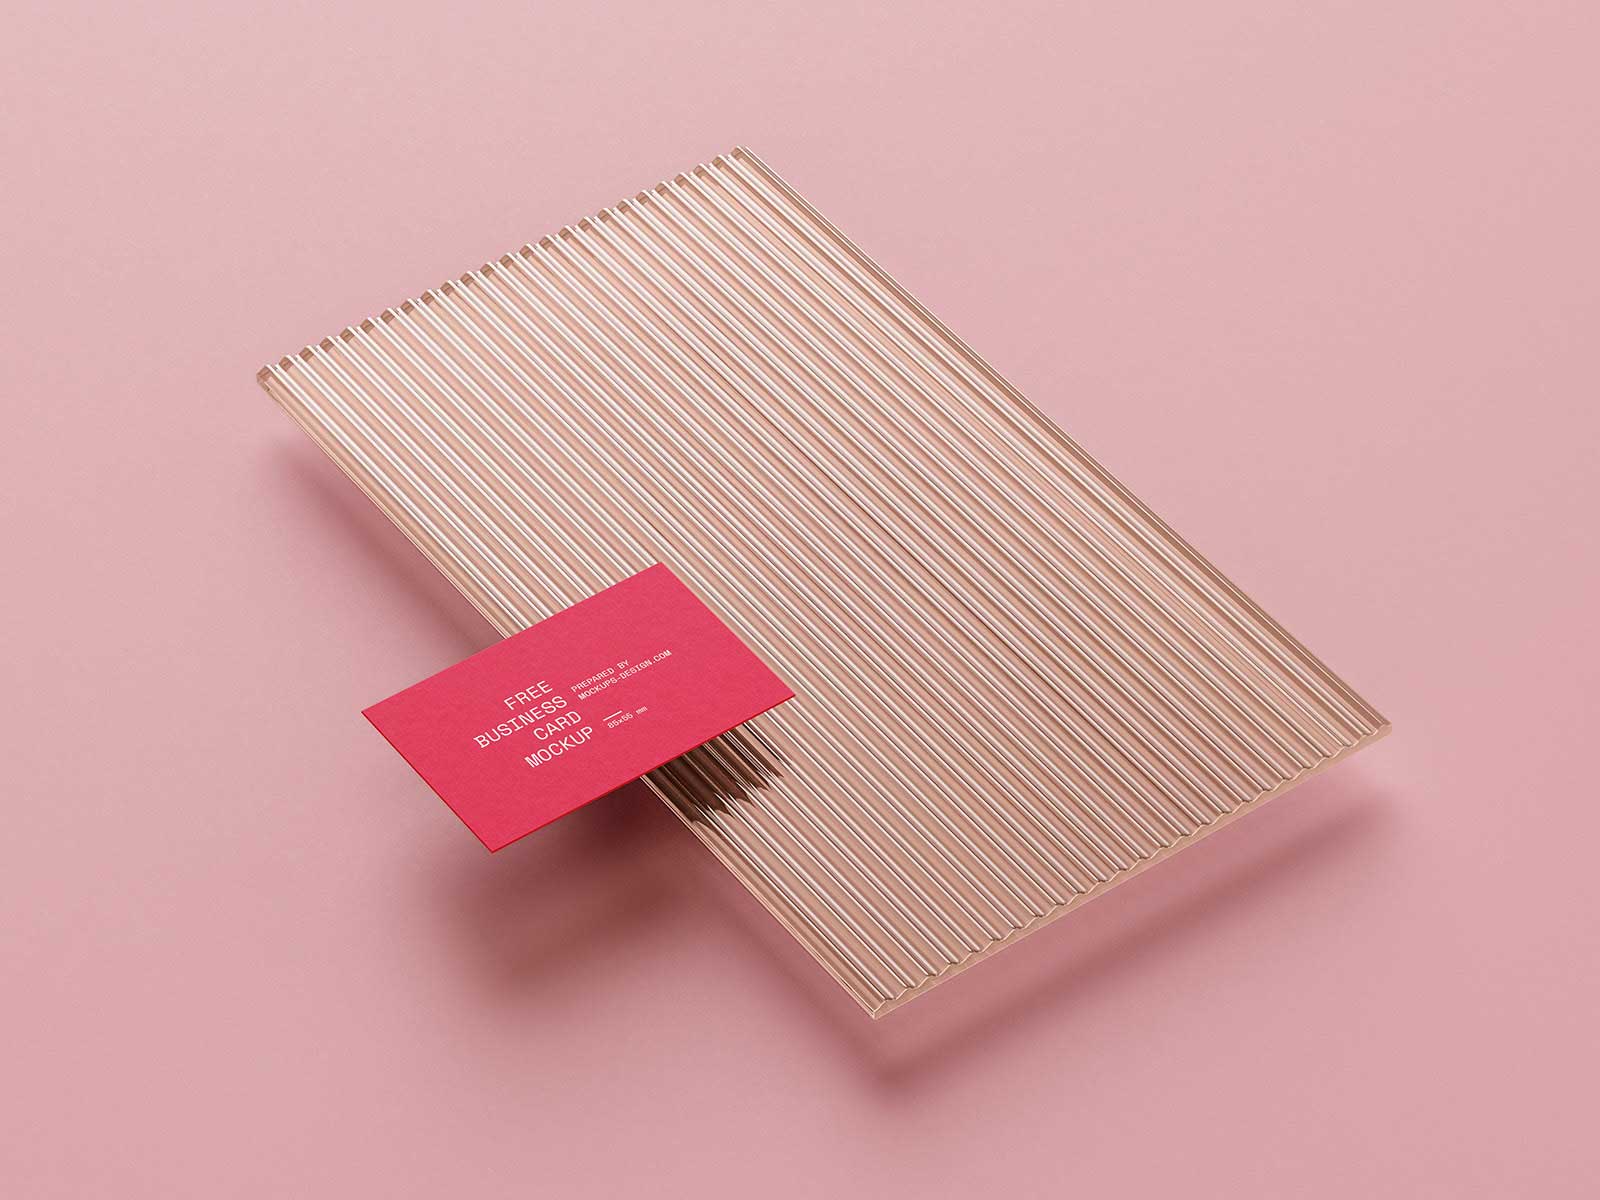 Business Card Free Mockup PSD Scenes: Elevate Your Professional Image